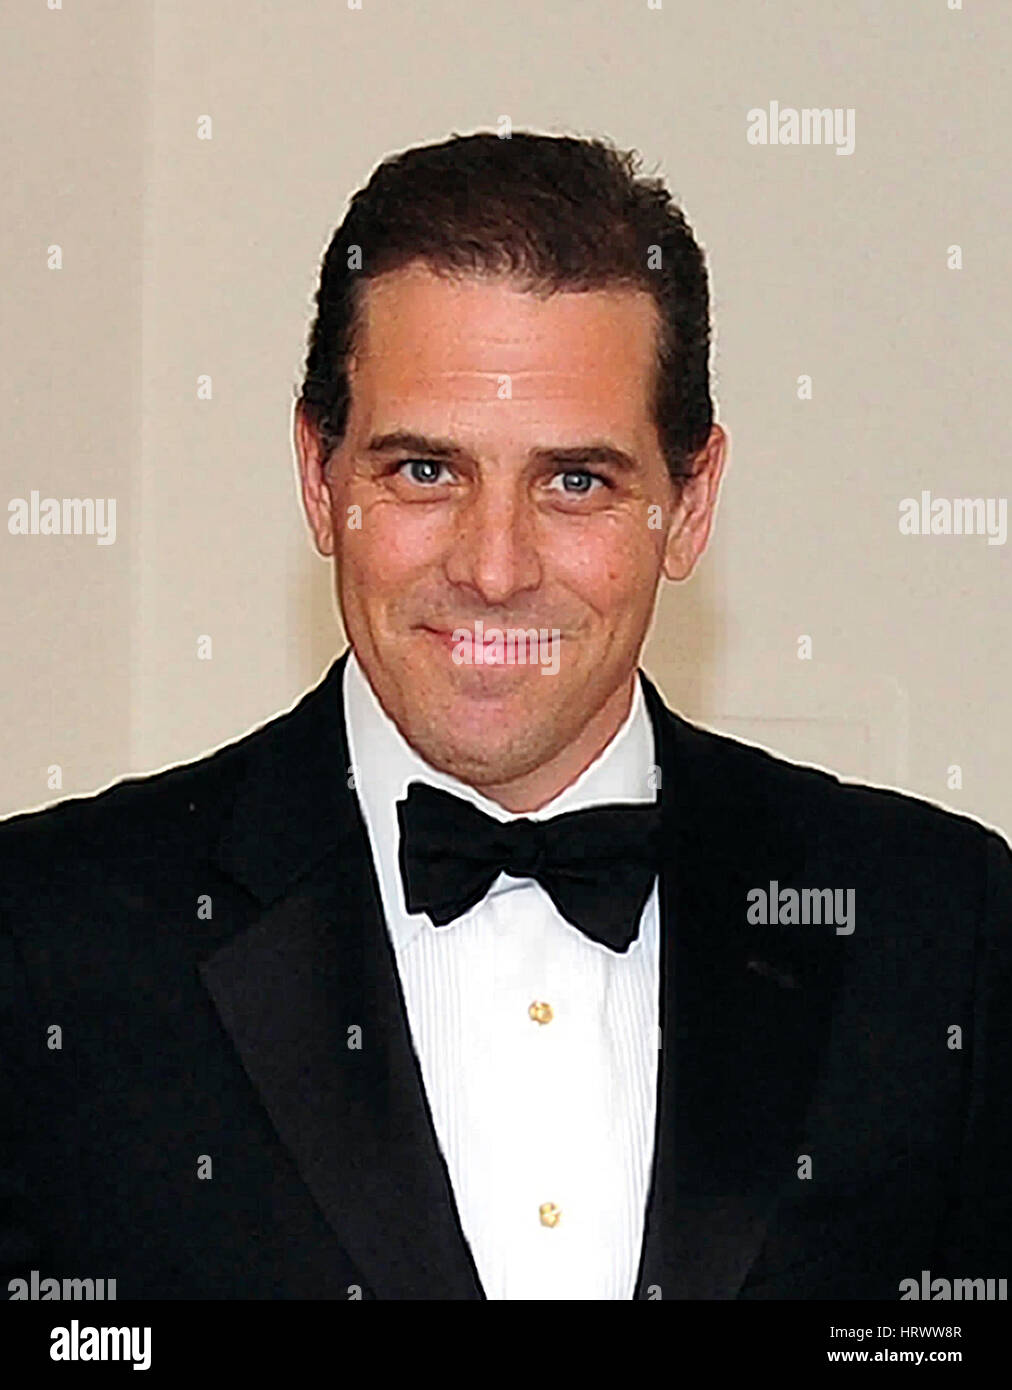 Hunter Biden arrives with his wife, Kathleen Biden, for the Official Dinner in honor of Prime Minister David Cameron of Great Britain and his wife, Samantha, at the White House in Washington, DC on Tuesday, March 14, 2012. It was reported on Thursday, March 2, 2017 that Hunter is in a relationship with his late brother Beau's wife, Hallie, following separation from his wife, Kathleen, in late 2015. Credit: Ron Sachs/CNP (RESTRICTION: NO New York or New Jersey Newspapers or newspapers within a 75 mile radius of New York City) - NO WIRE SERVICE - Photo: Ron Sachs/Consolidated News Phot Stock Photo